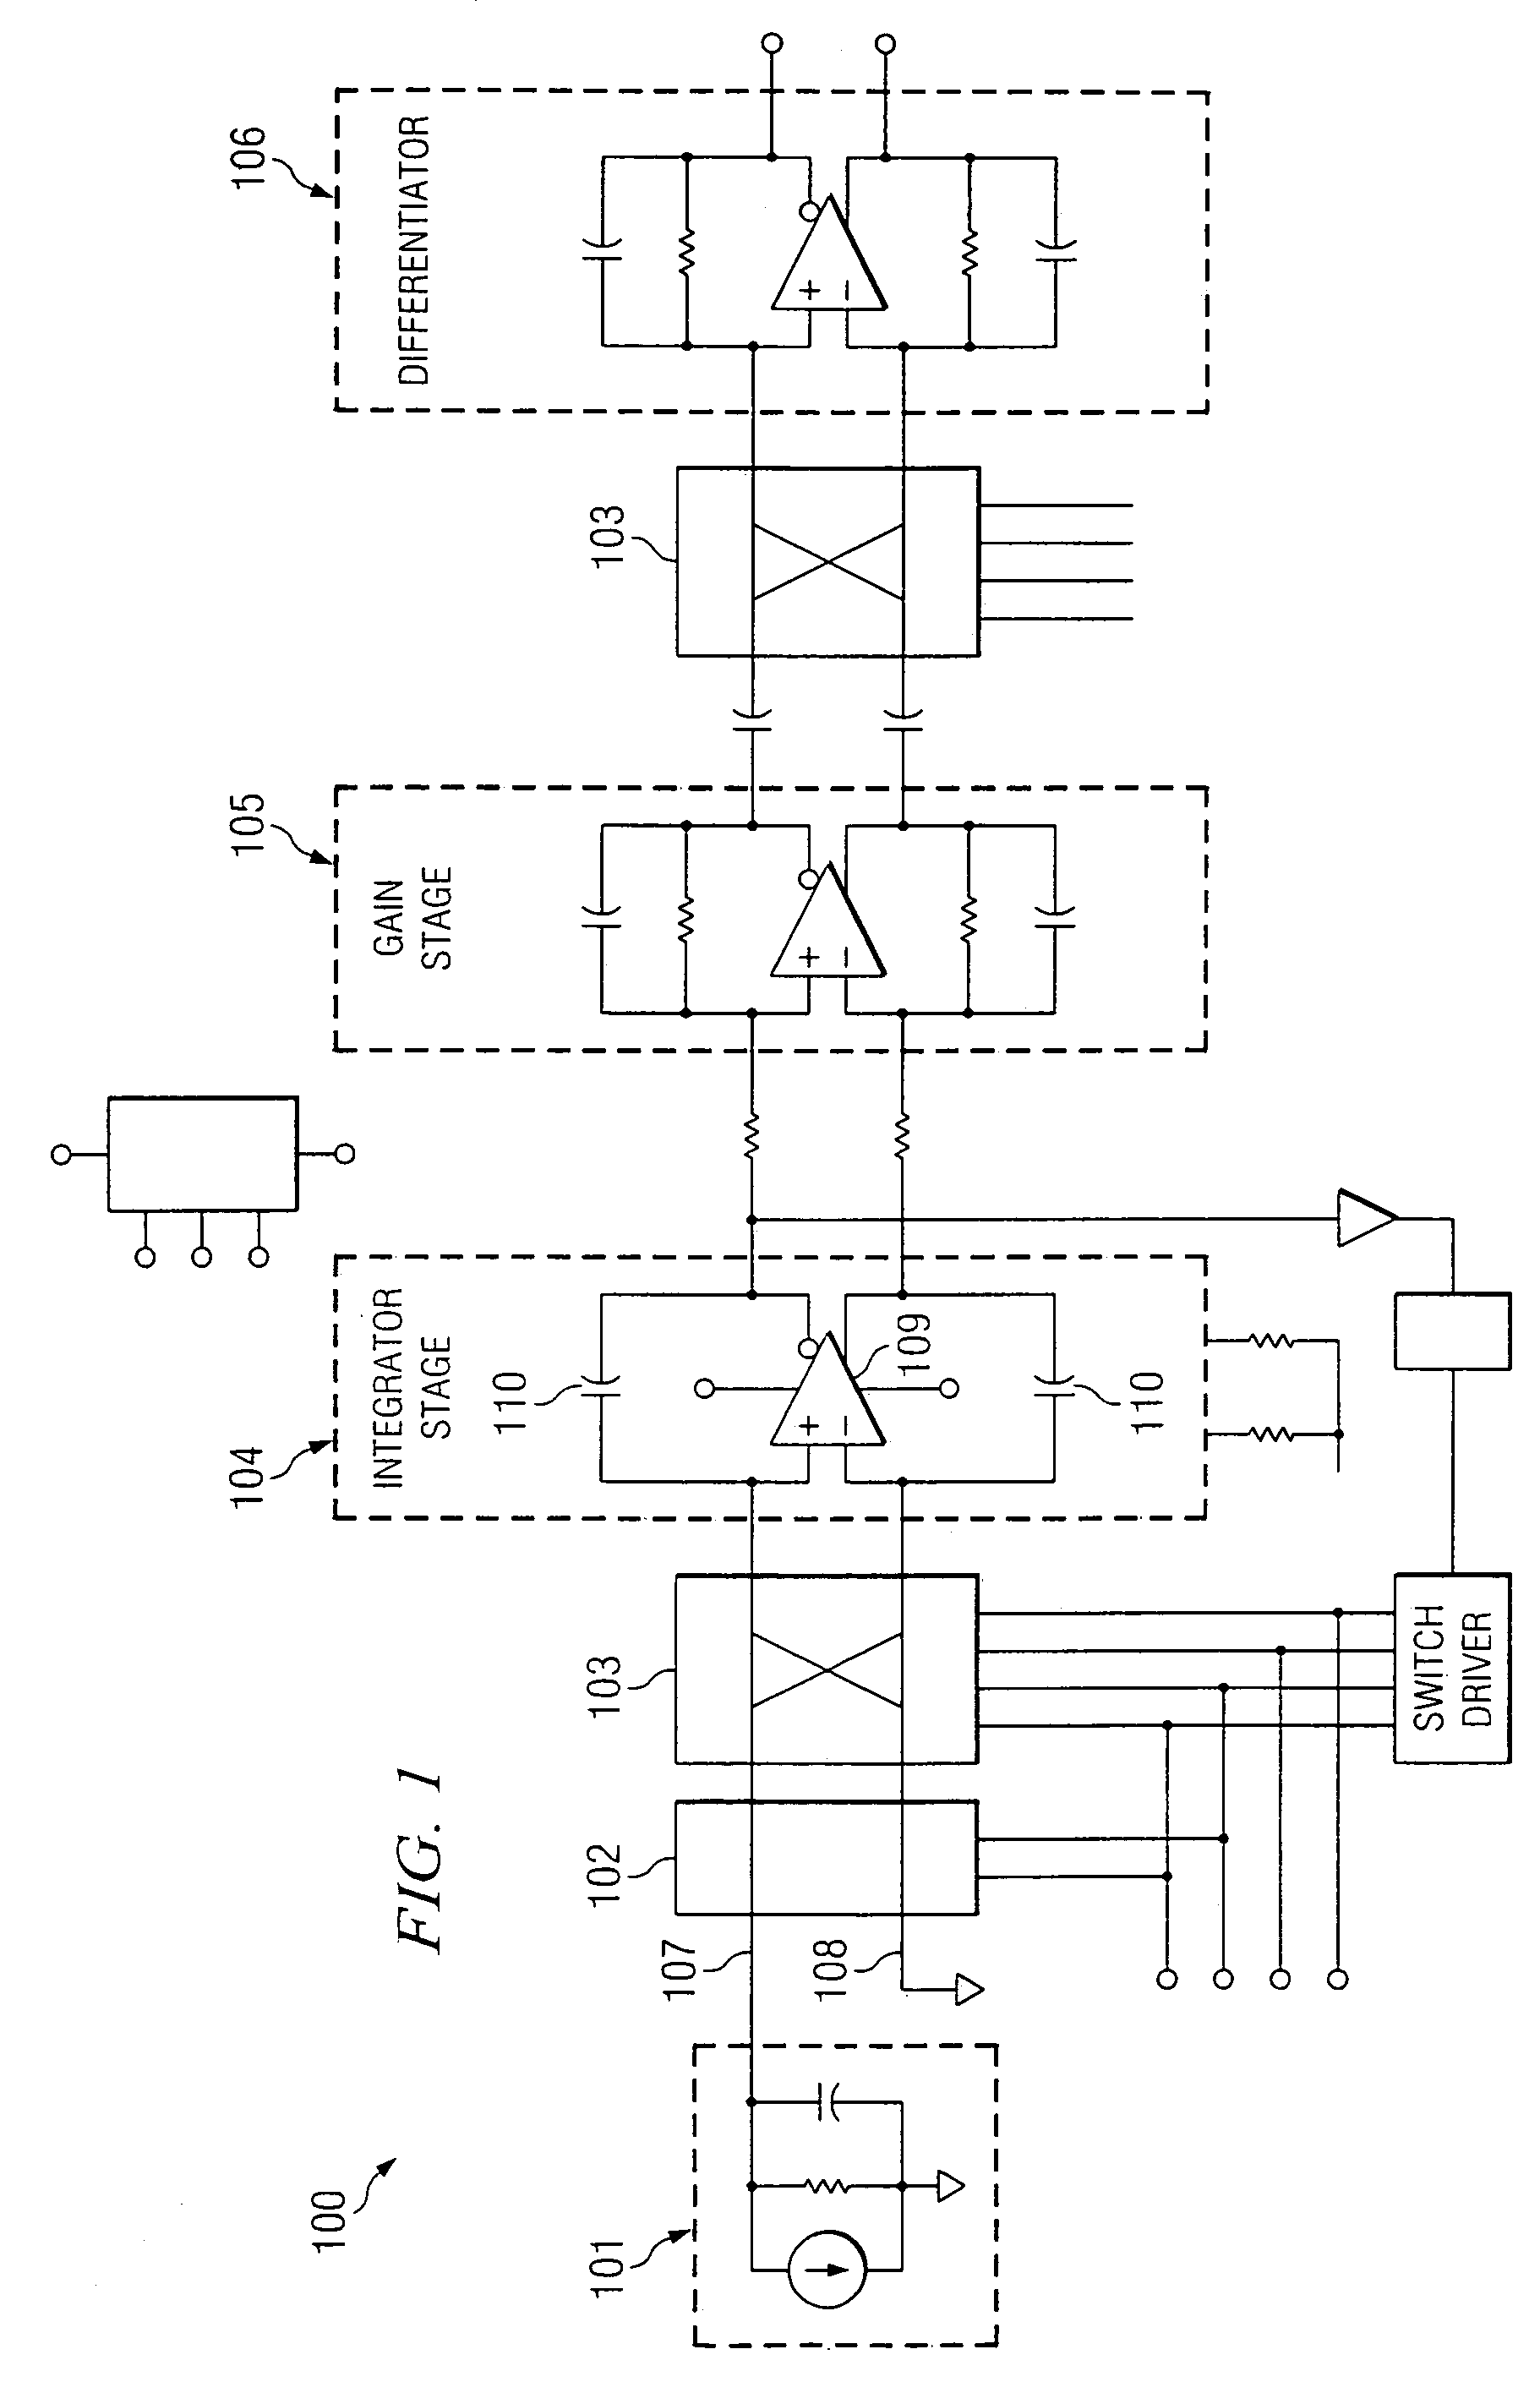 Systems and methods for measuring picoampere current levels